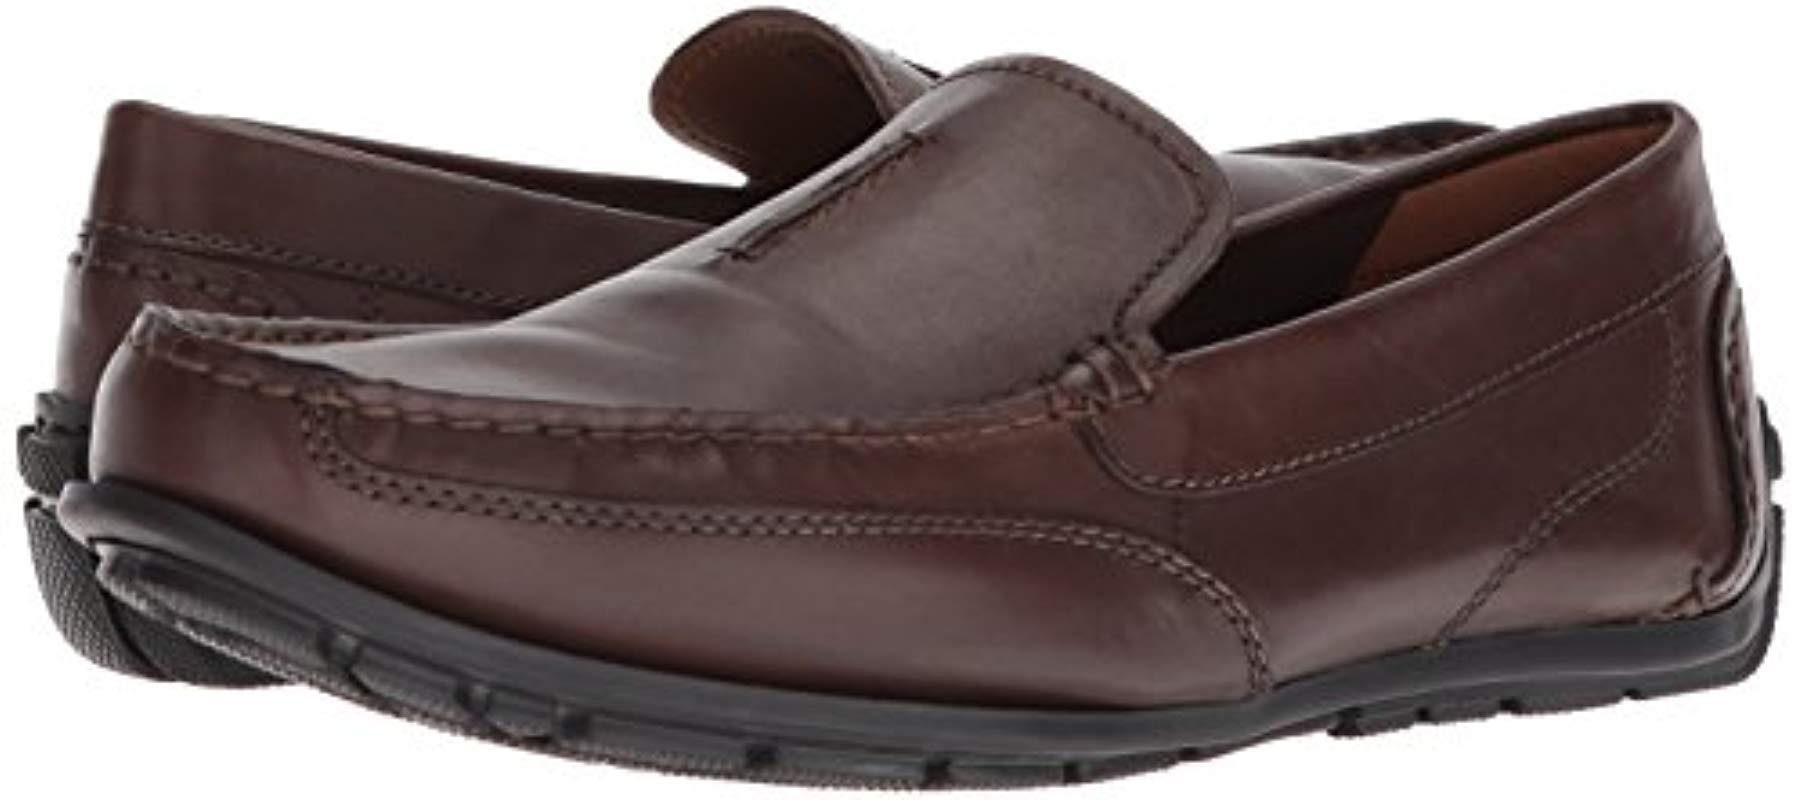 clarks men's benero race driving style loafer